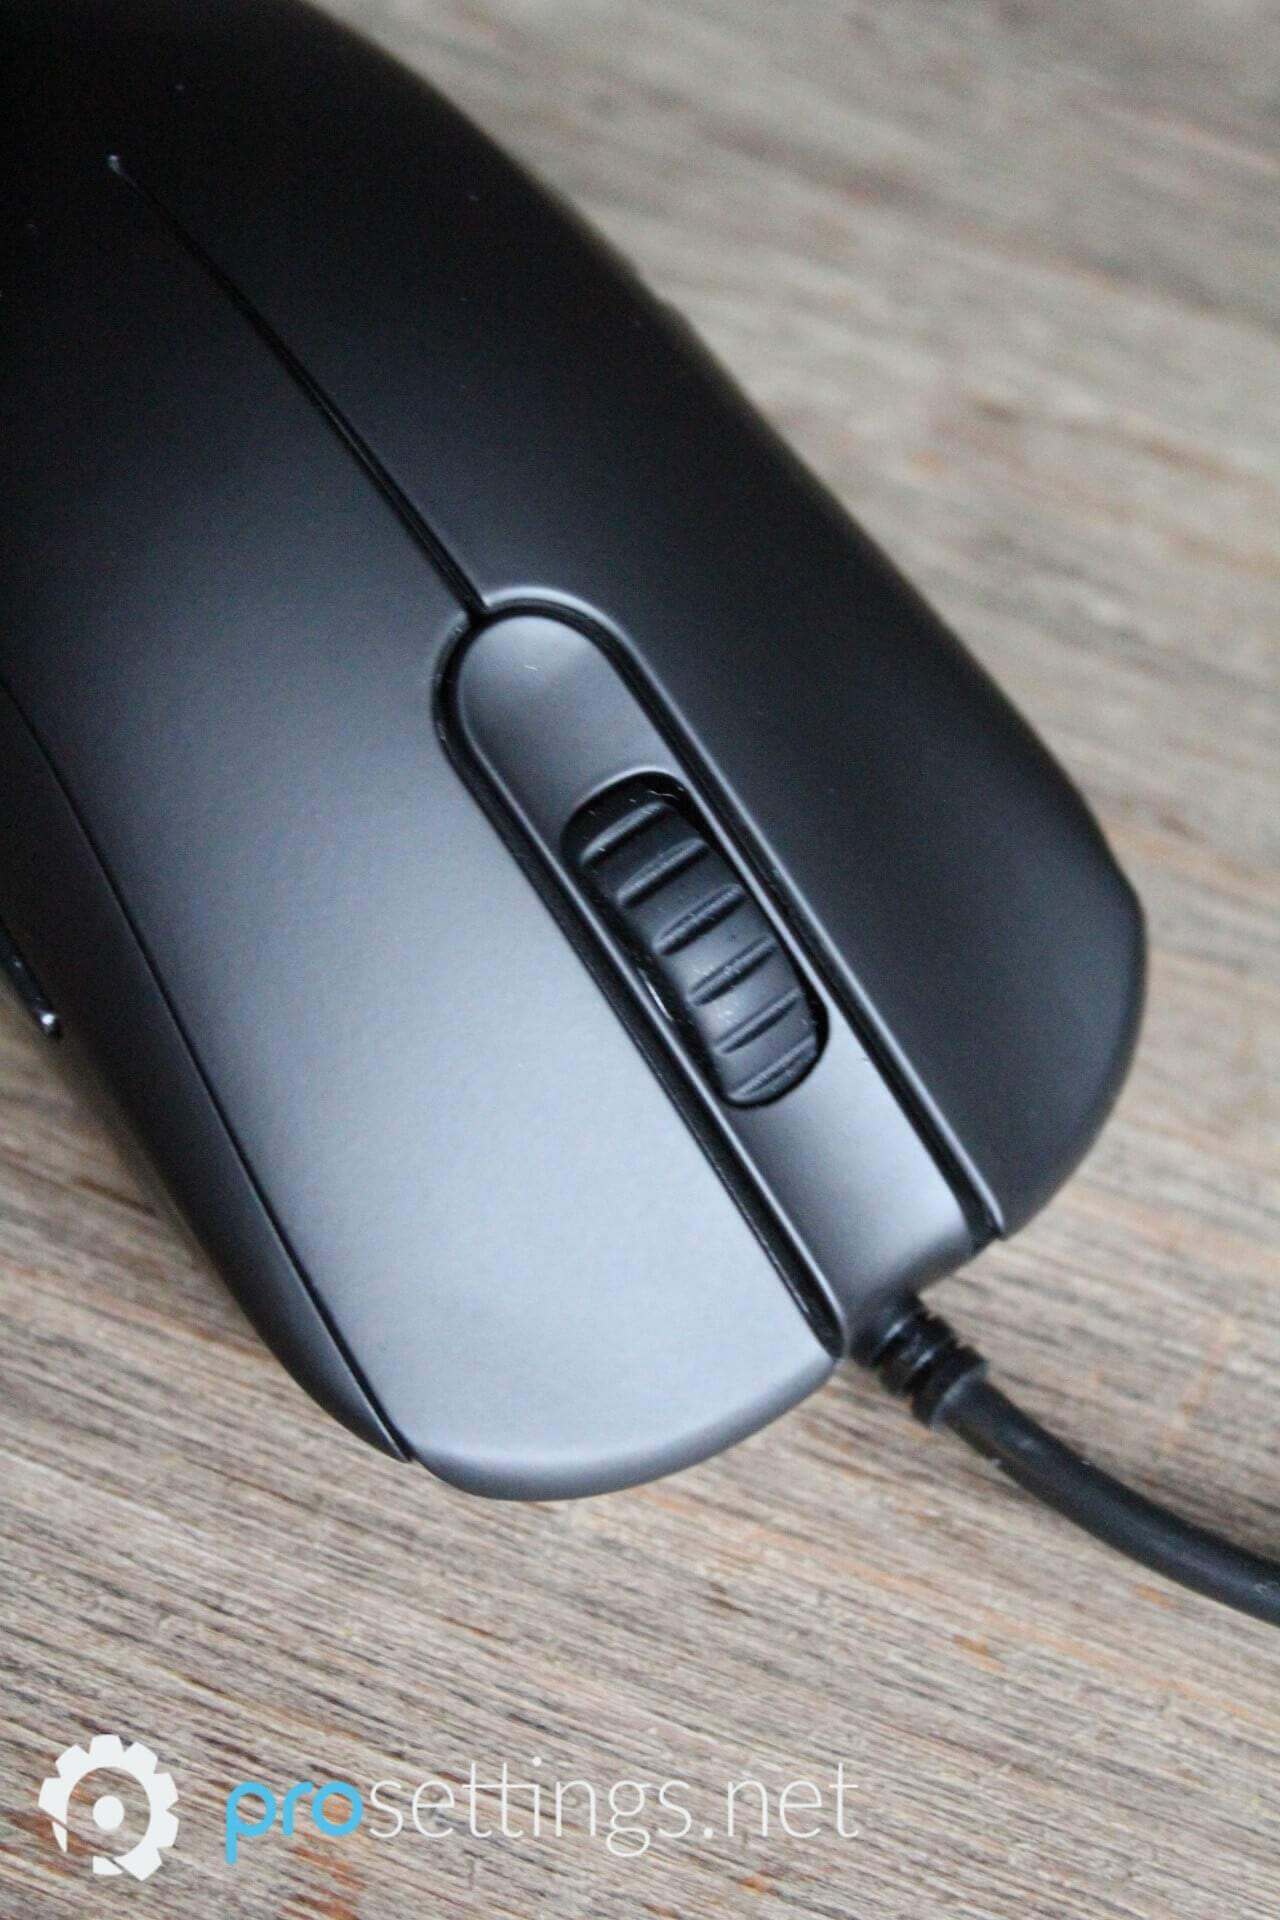 Zowie ZA12 Review Mouse Buttons and Scroll